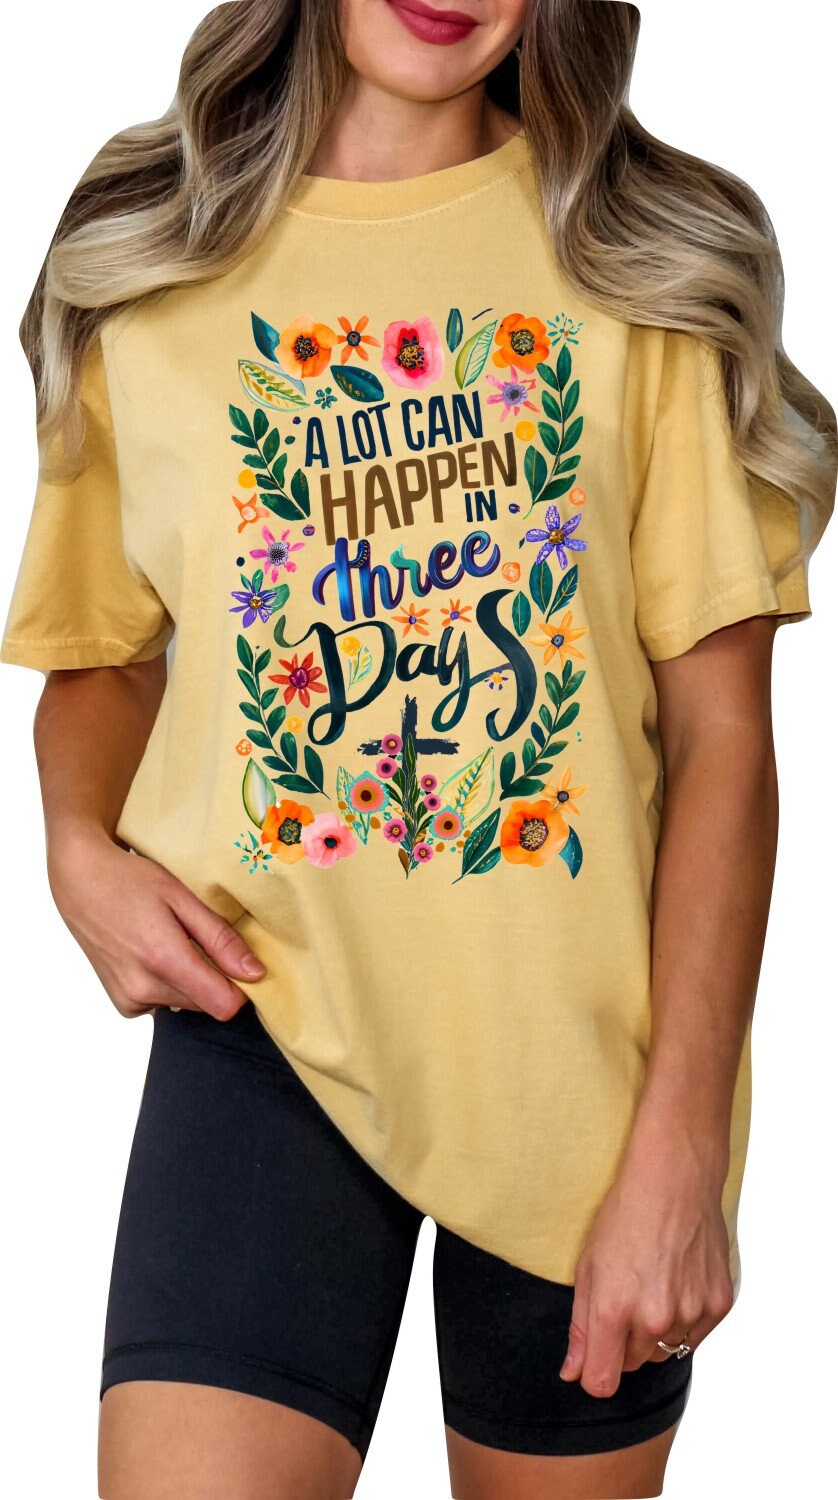 Christian Shirts Religious Tshirt Christian T Shirts Boho Christian Shirt Bible Verse Shirt A Lot Can Happen In 3 Days Floral Shirt